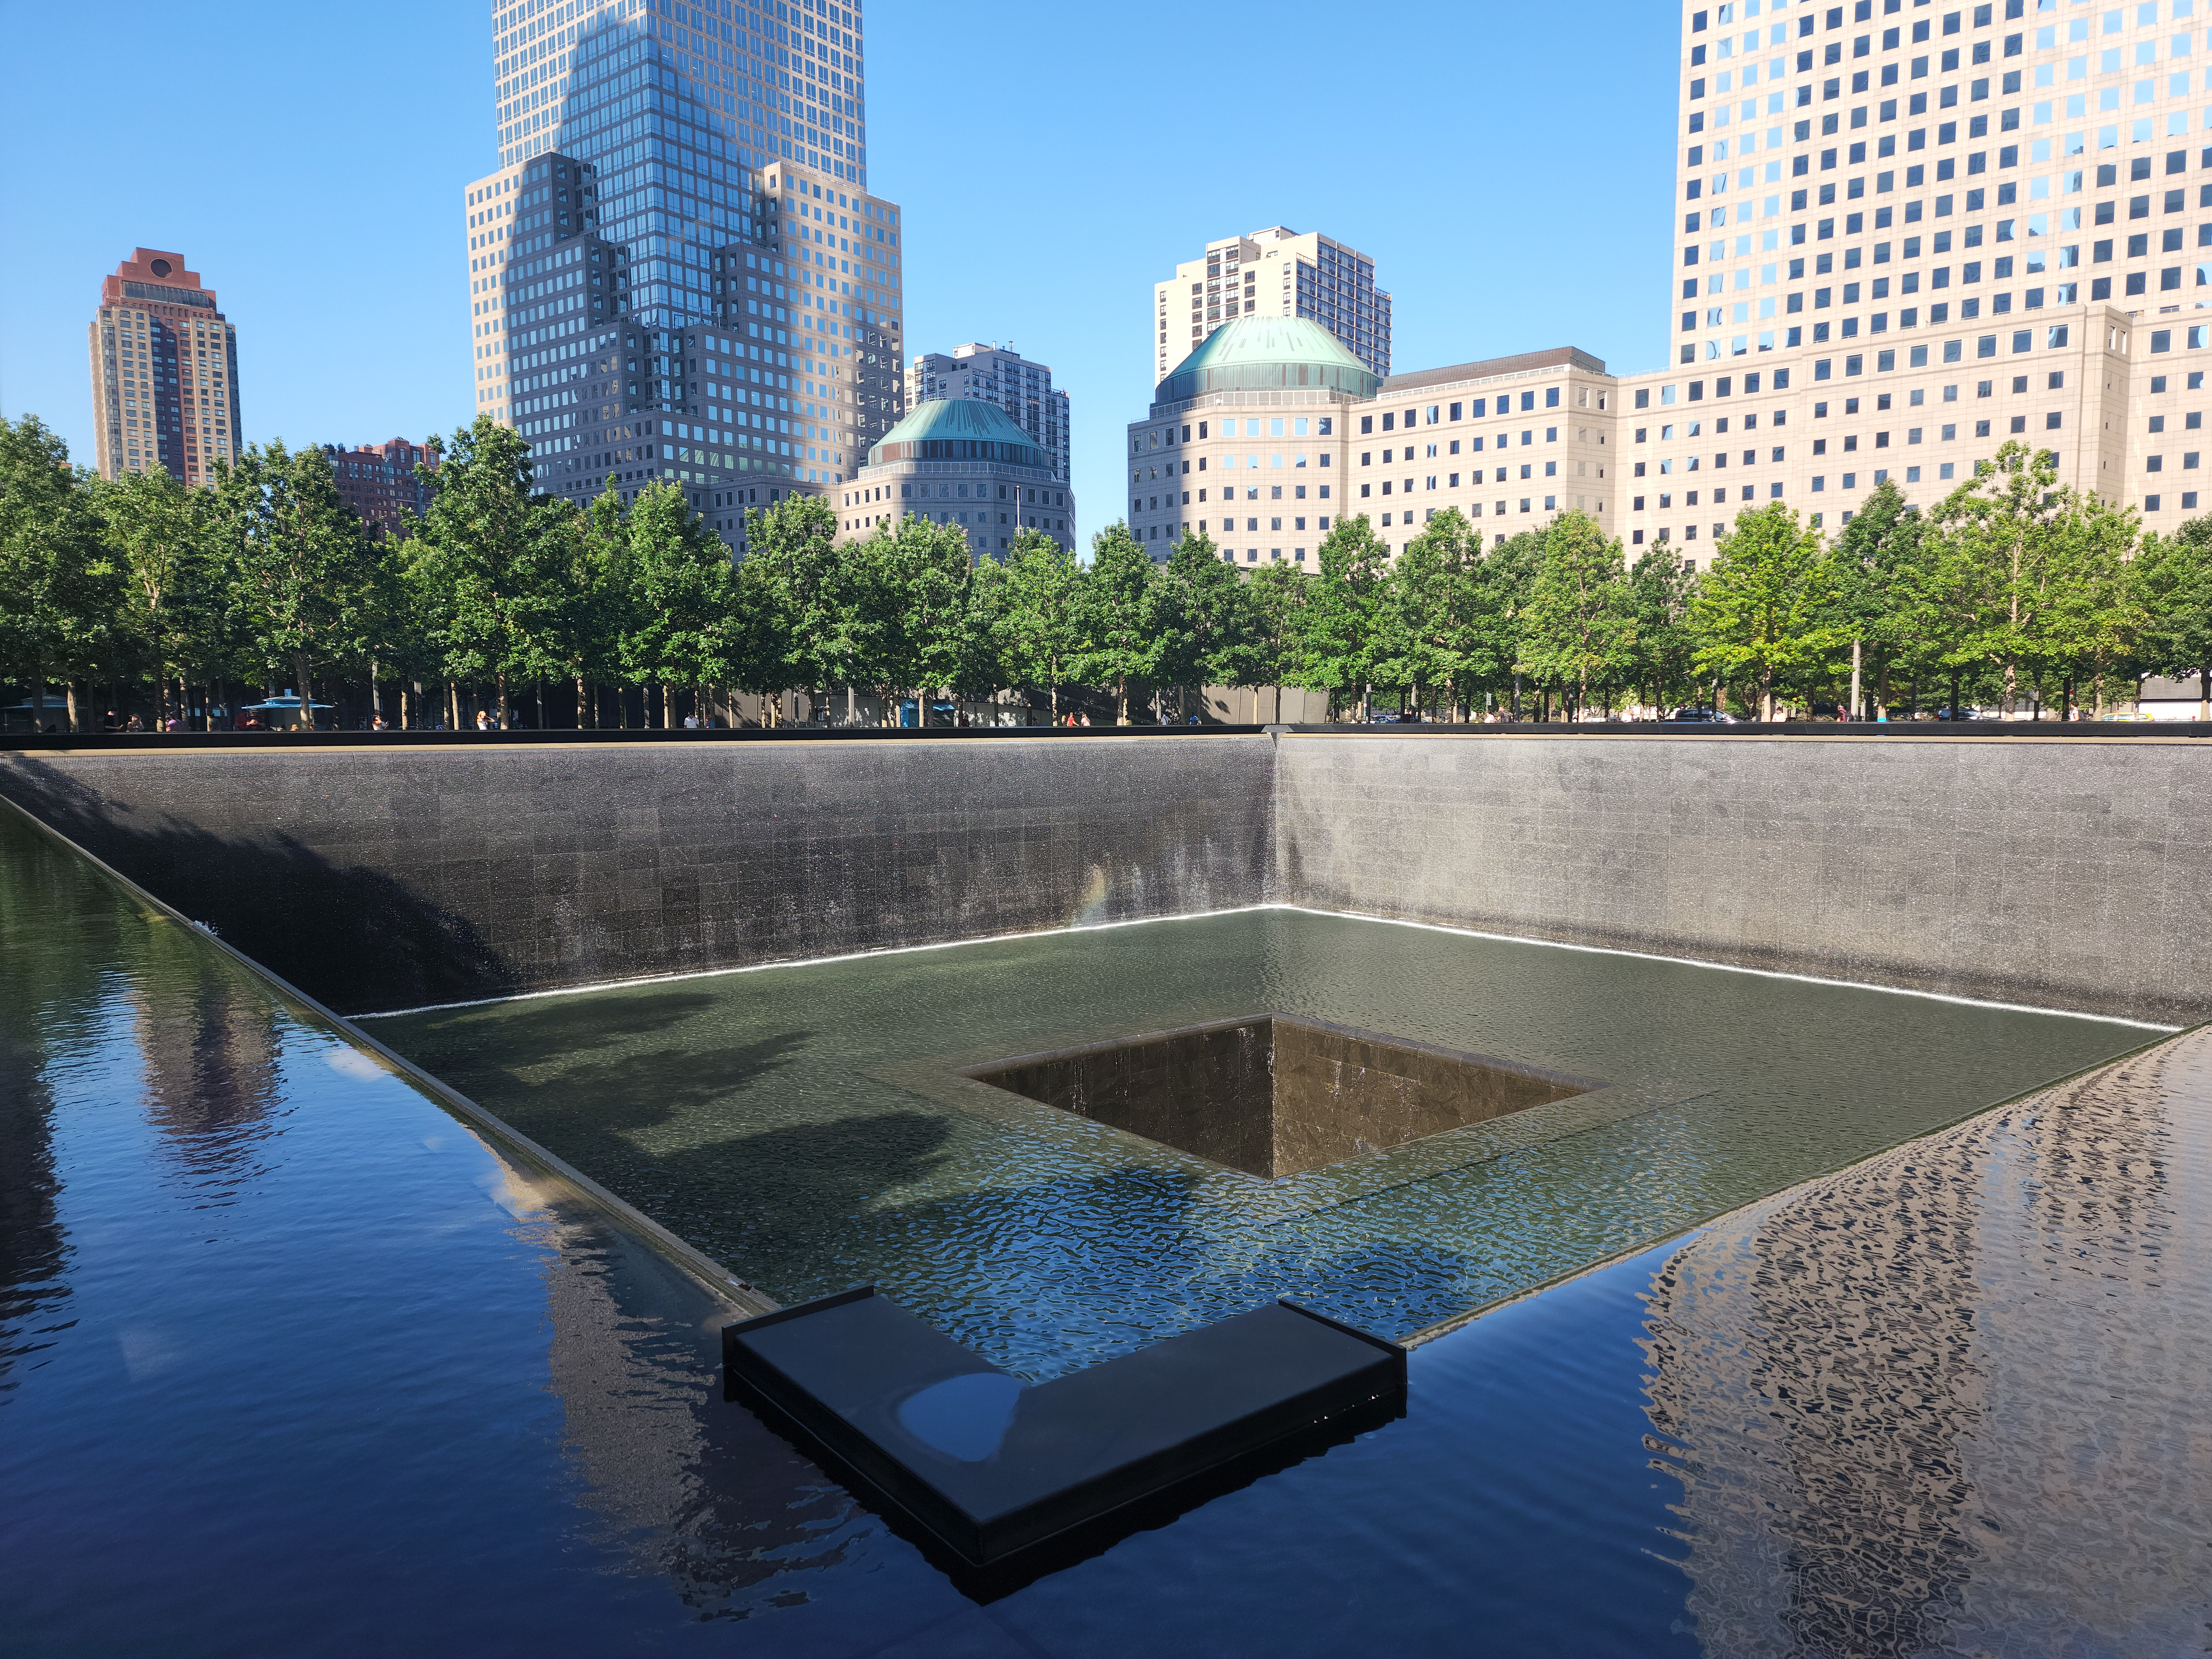 Picture of a place: 9&#x2F;11 Memorial Pools